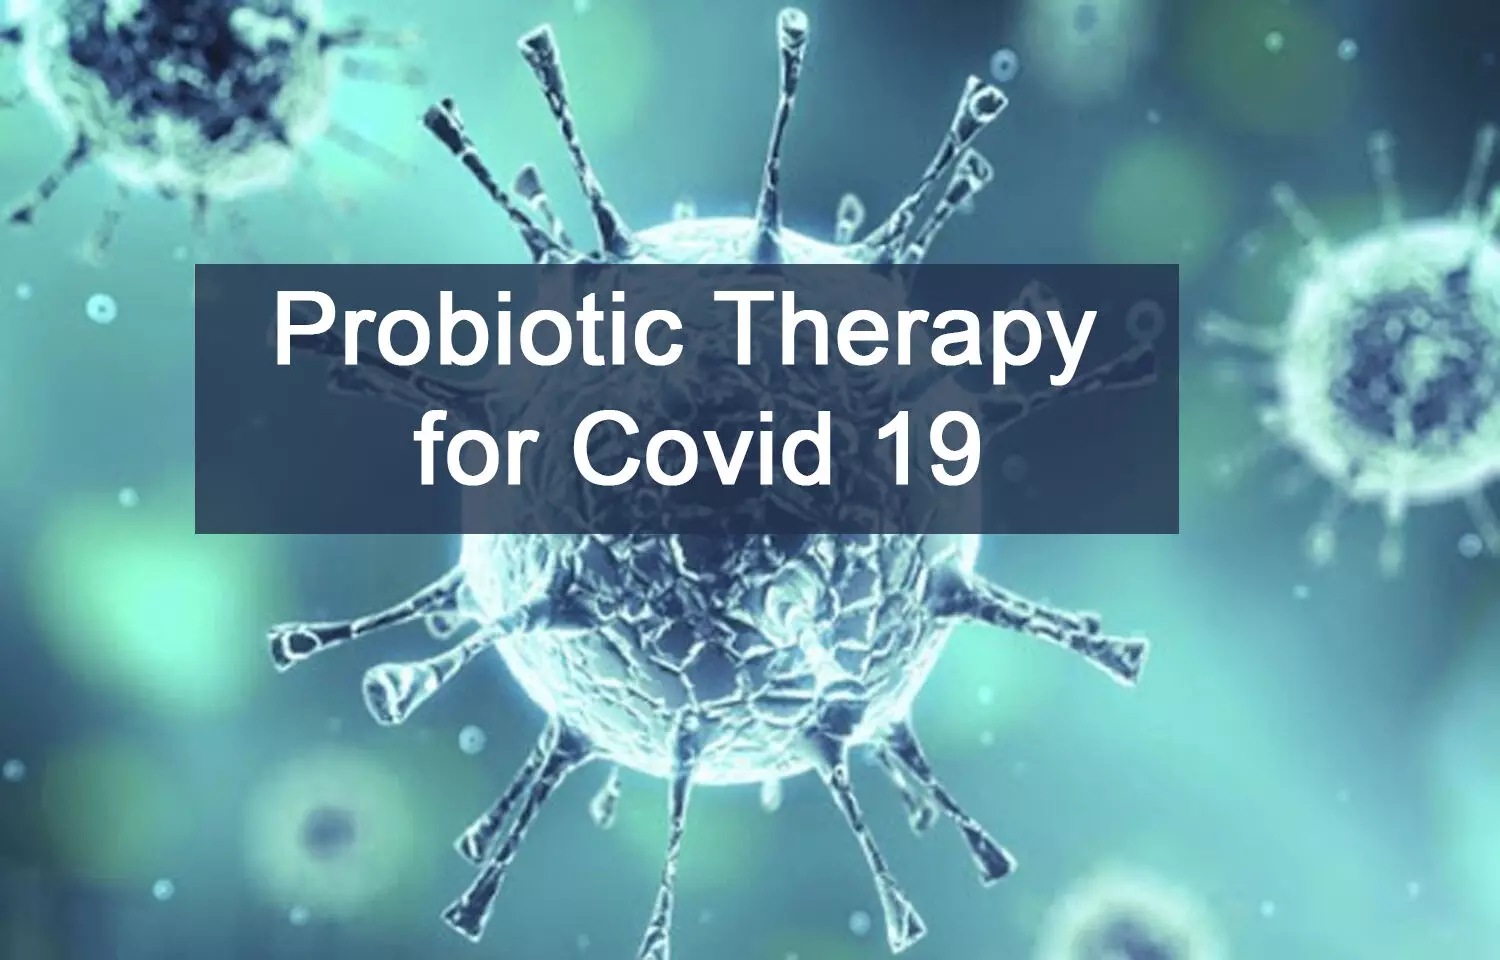 Clinical and Scientific Rationale for Use of Probiotics as Adjuvant in COVID-19 